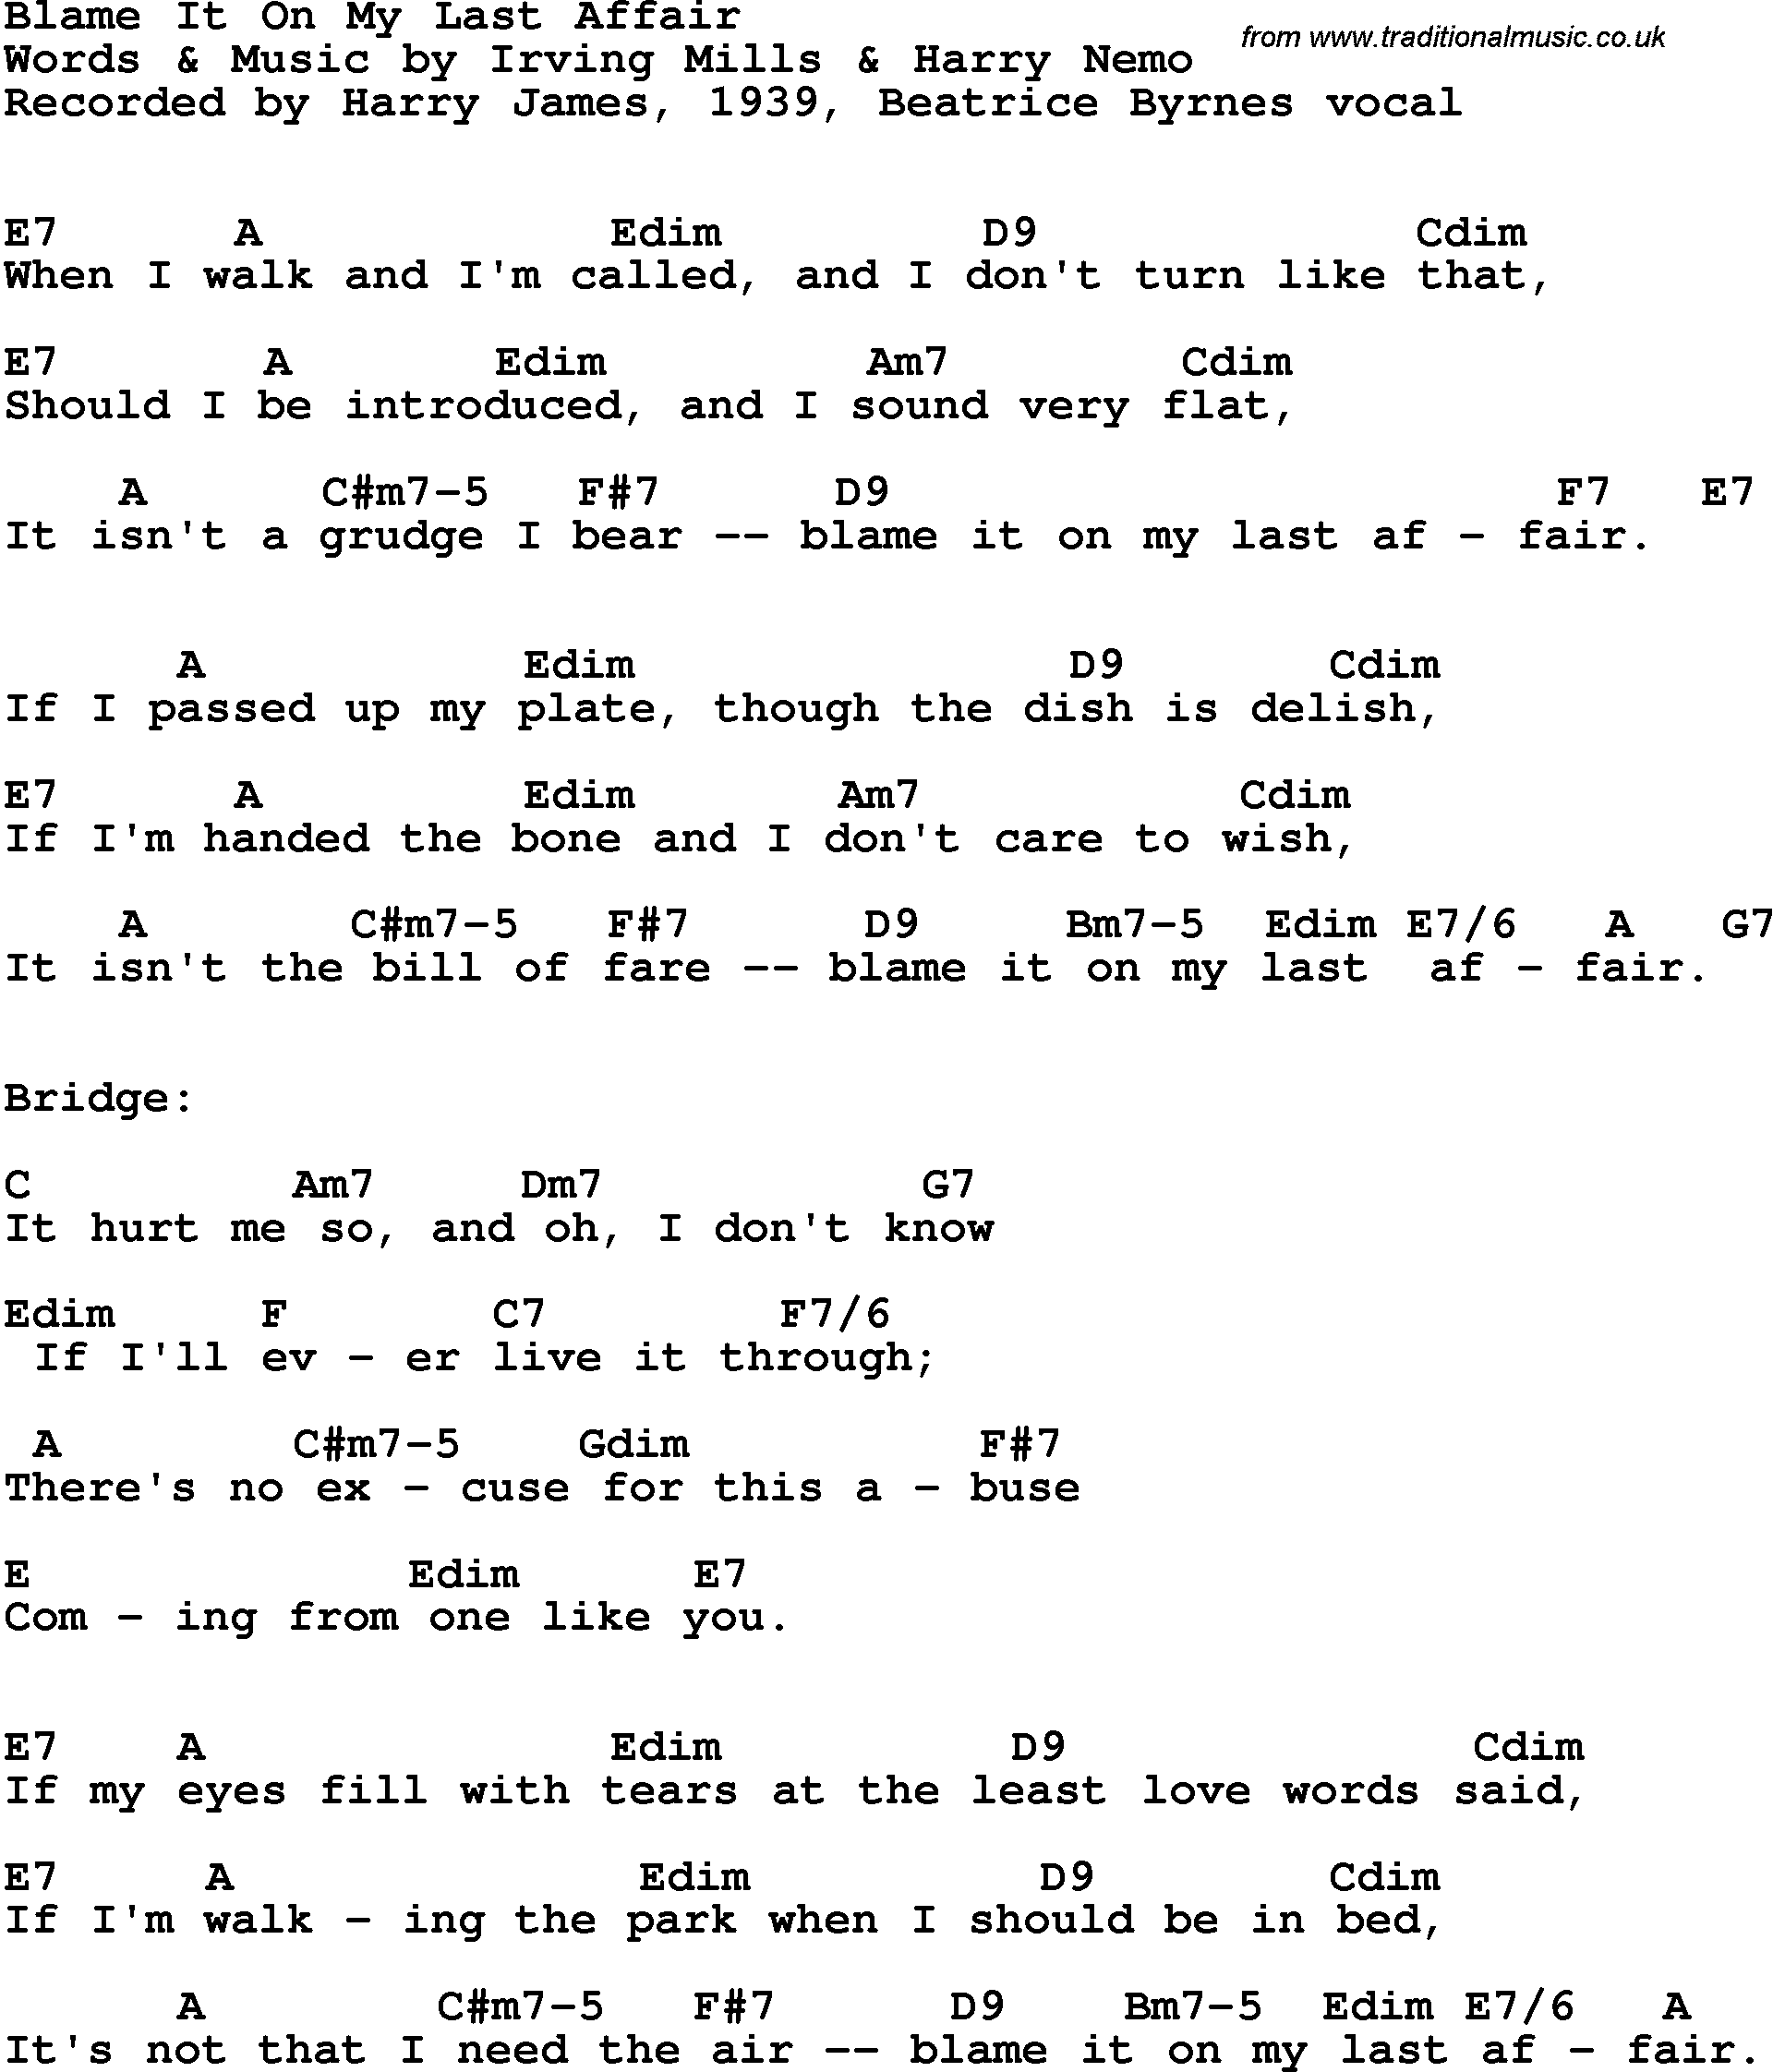 Song Lyrics with guitar chords for Blame It On My Last Affair - Harry James, 1939